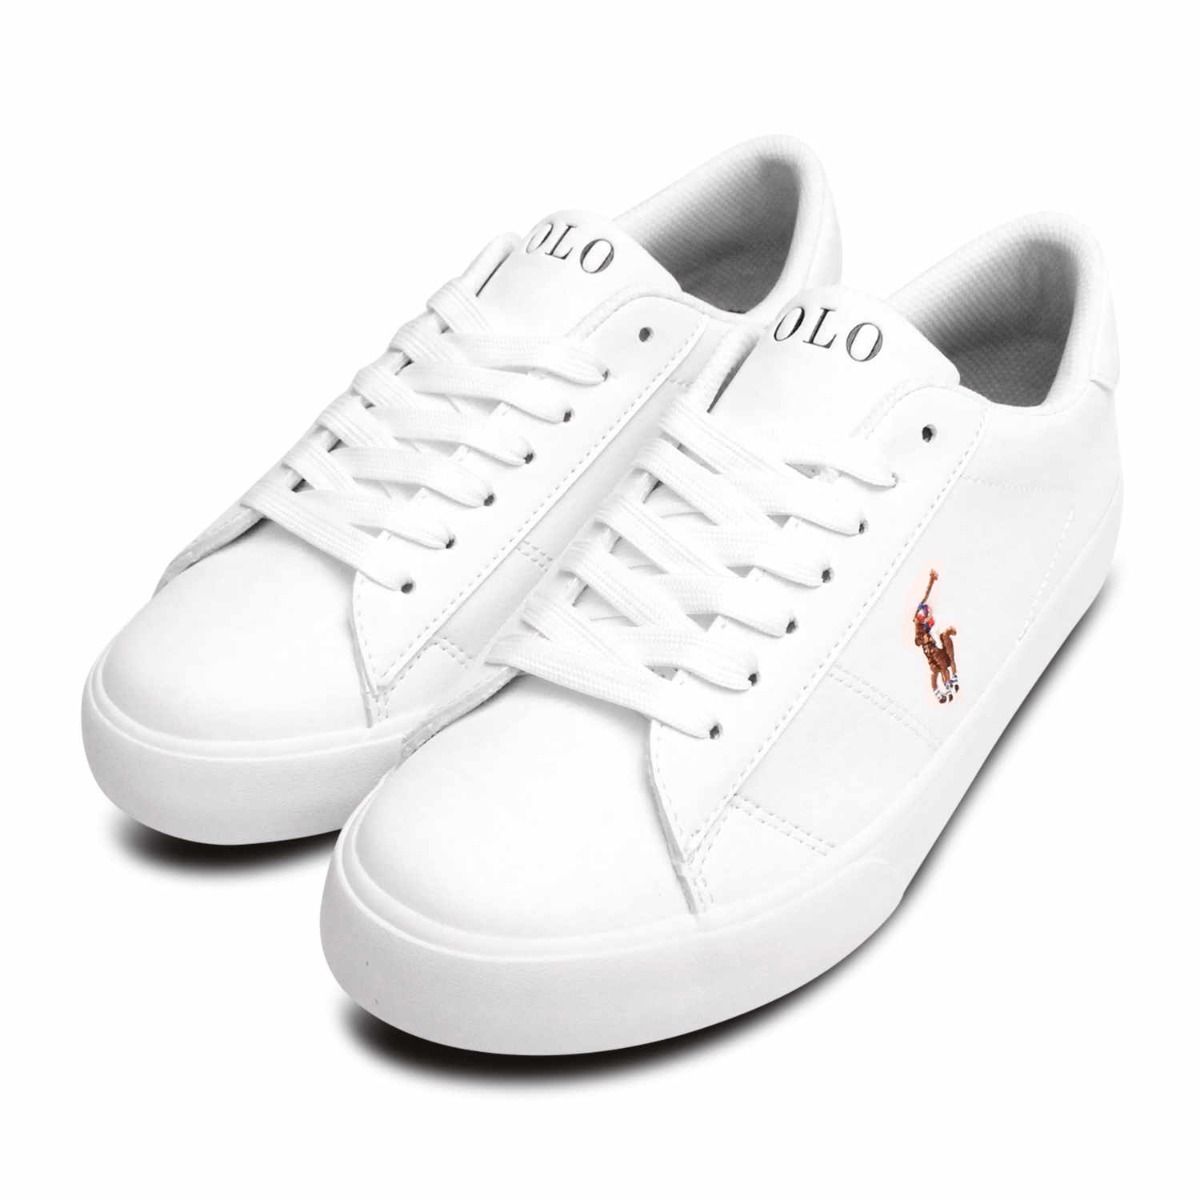 Ralph Lauren All White Designer Childrens Lace Up Shoes